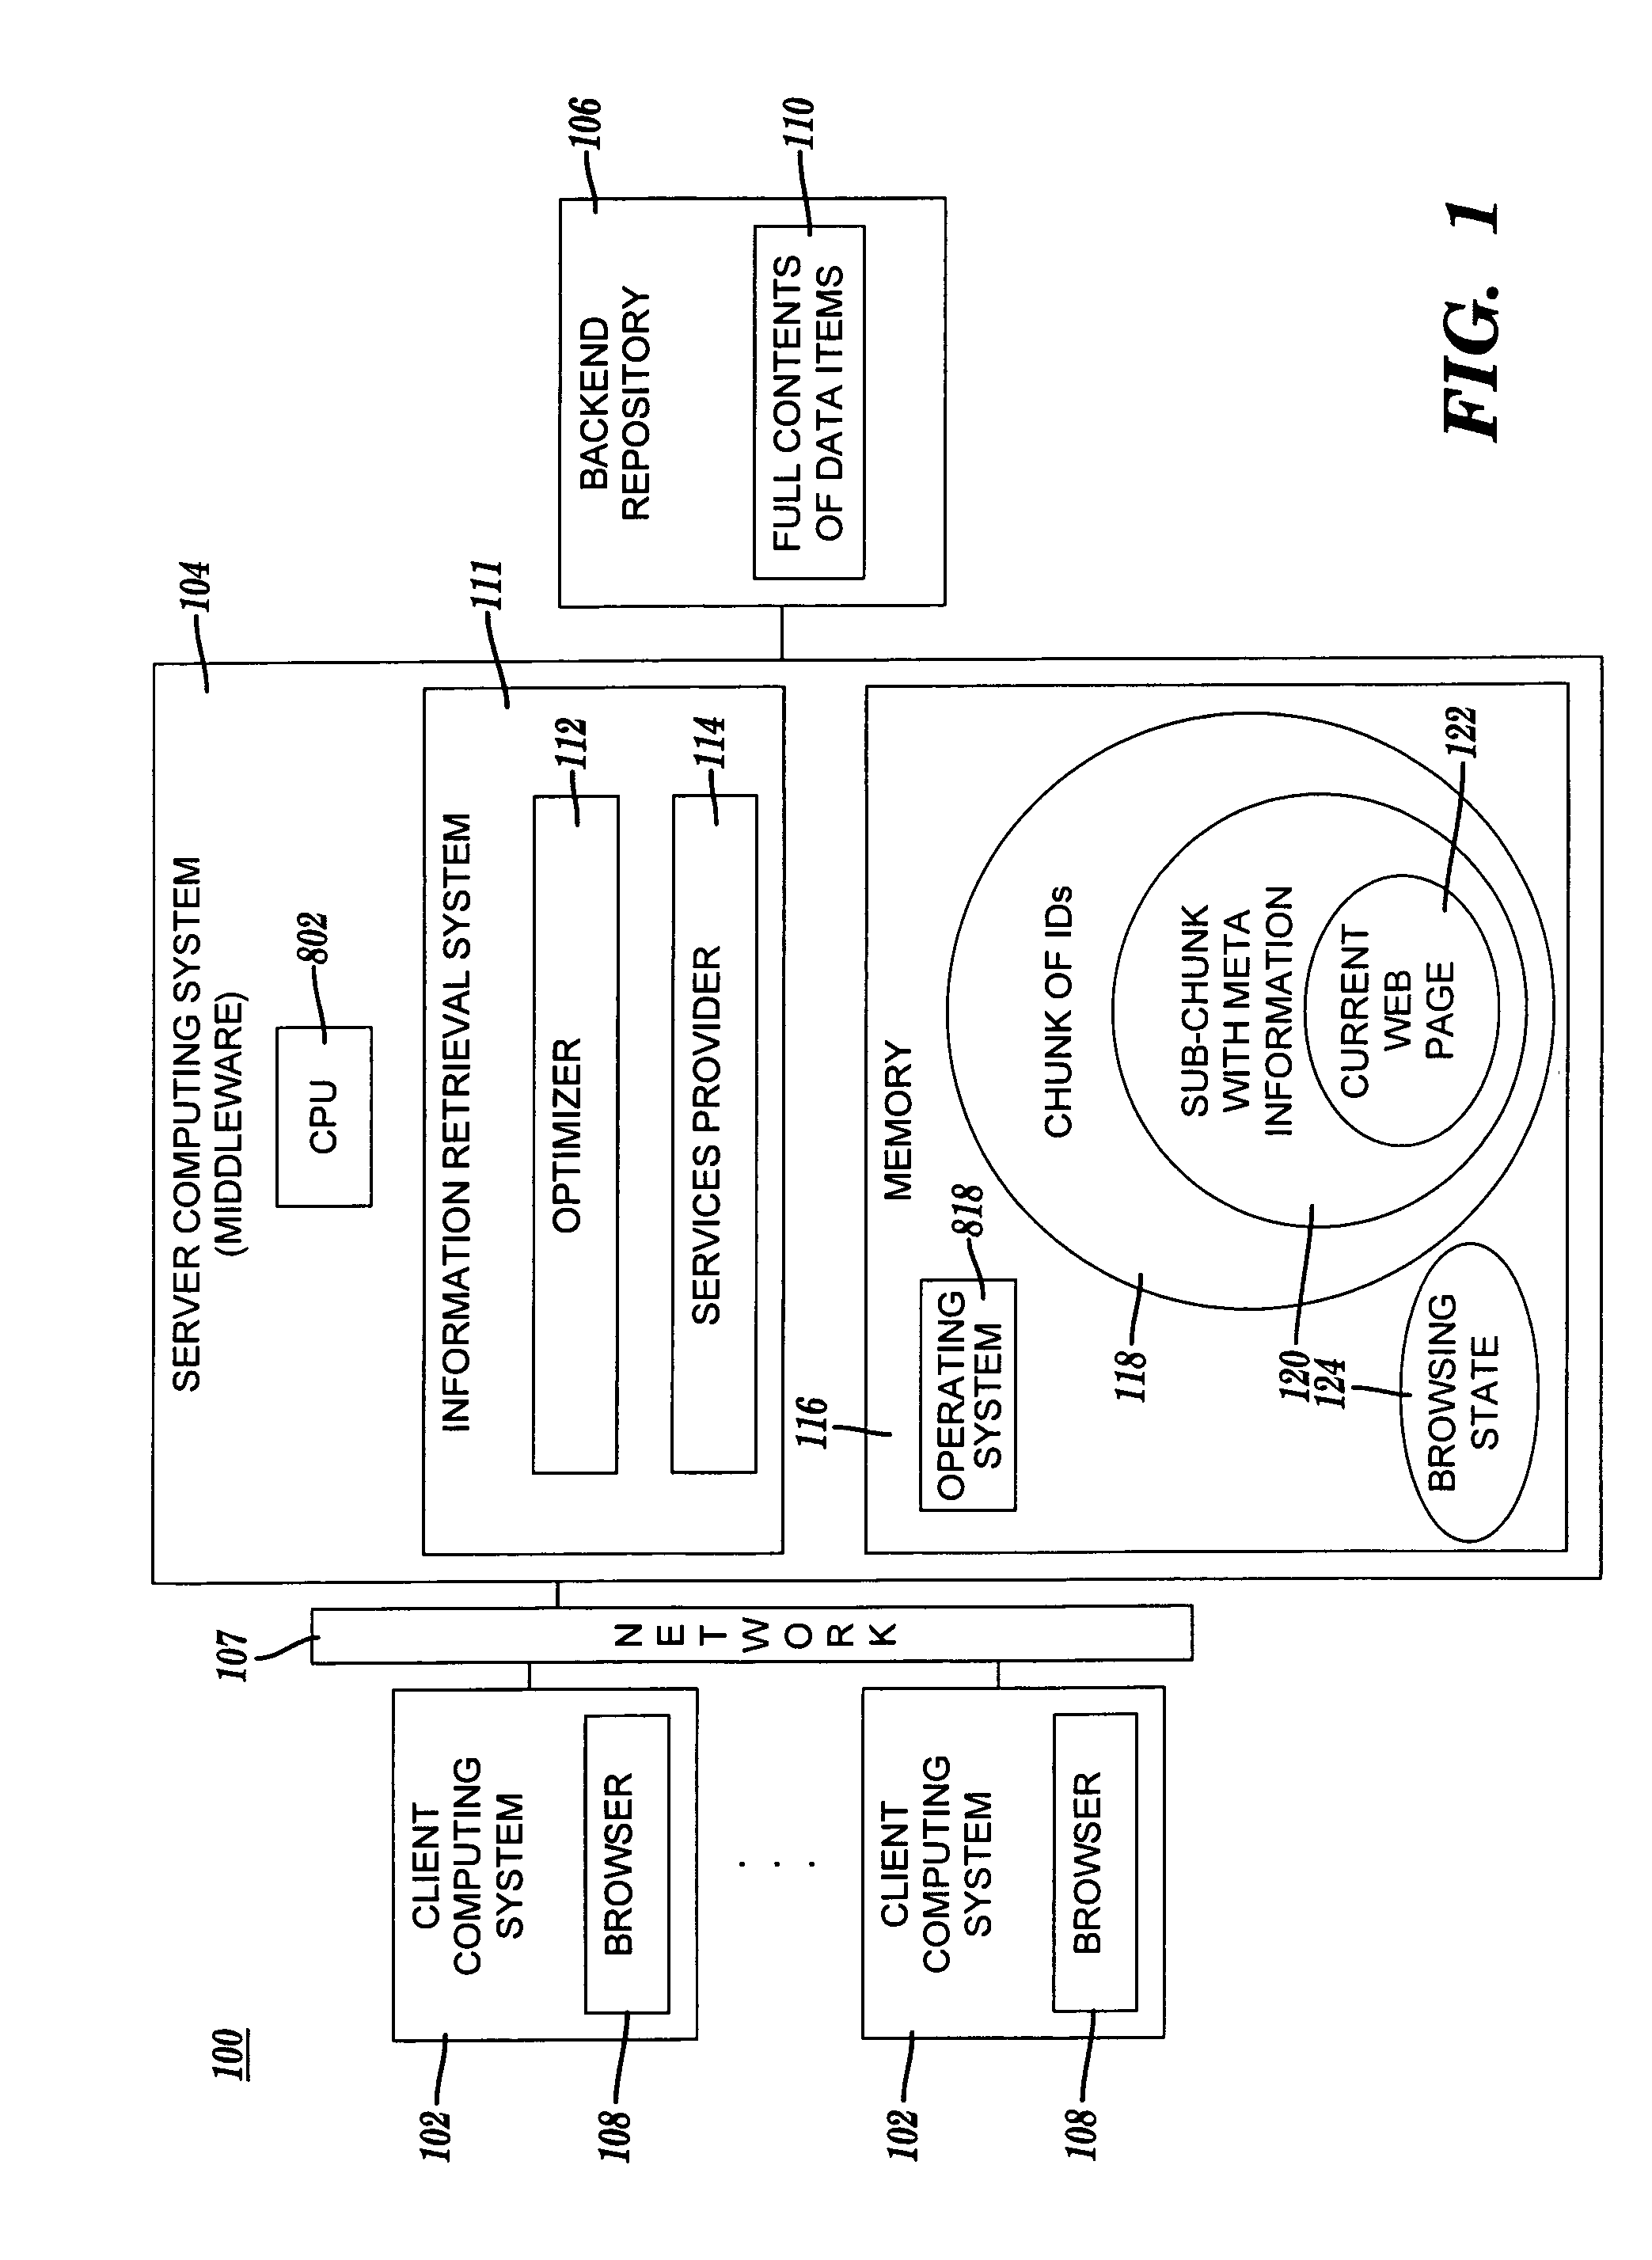 Method and system for employing a multiple layer cache mechanism to enhance performance of a multi-user information retrieval system